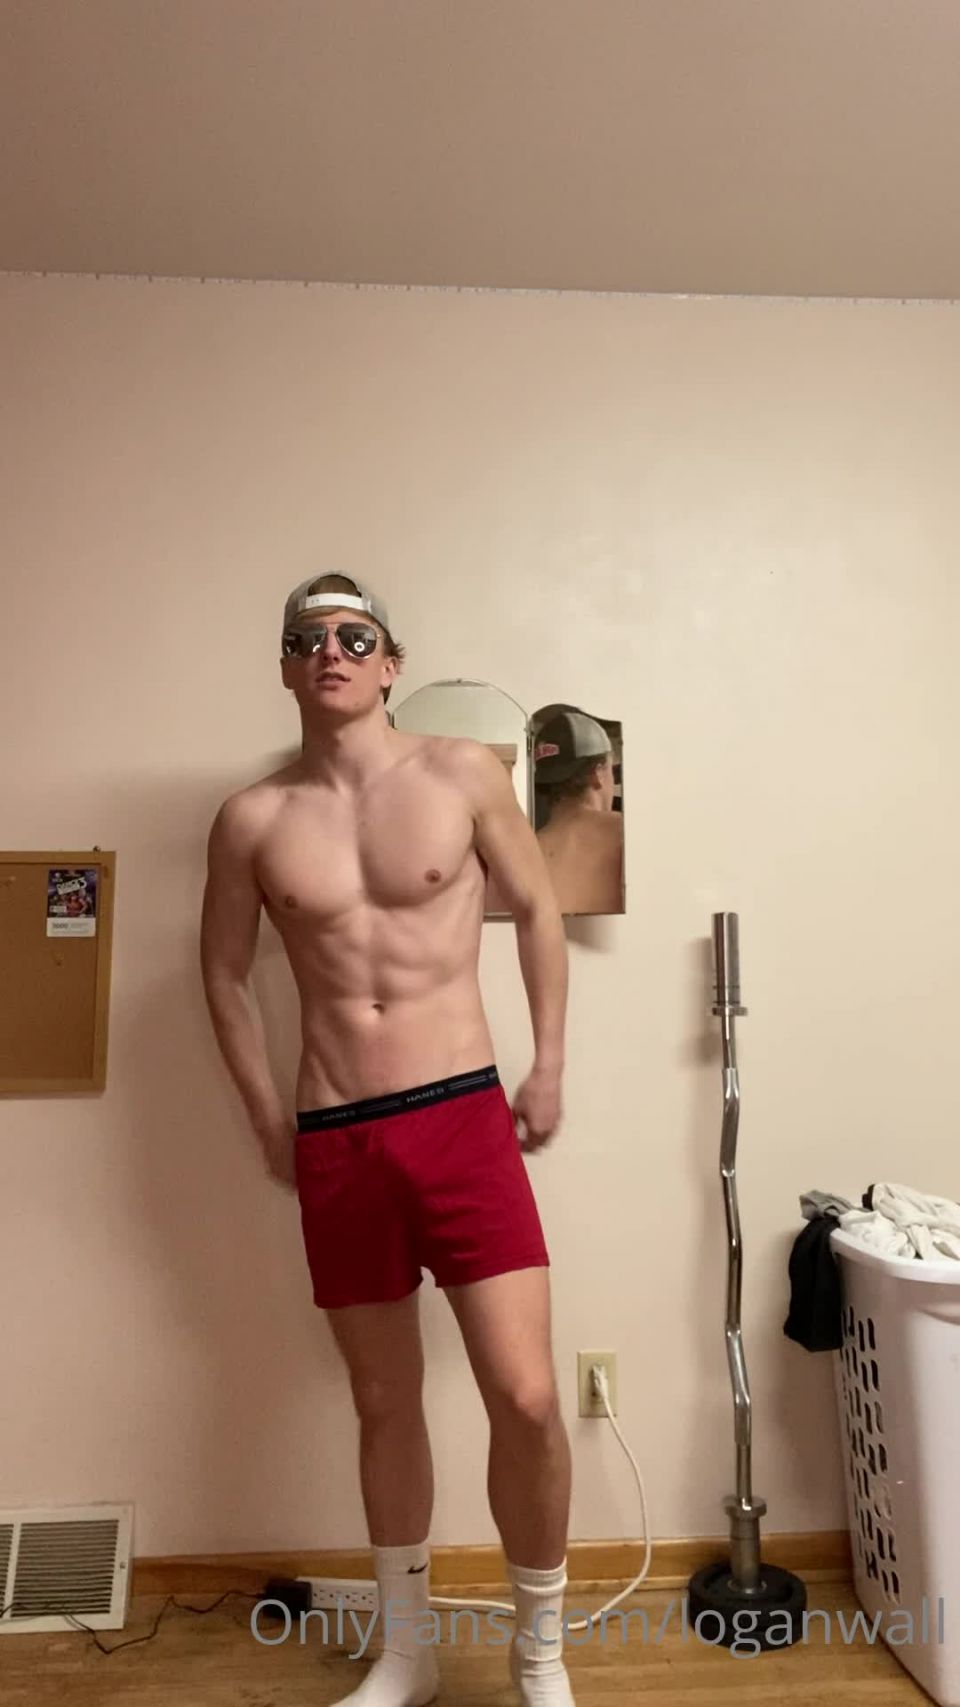 Loganwall () - i got something for you to suck this morning ps my socks are on 13-03-2021